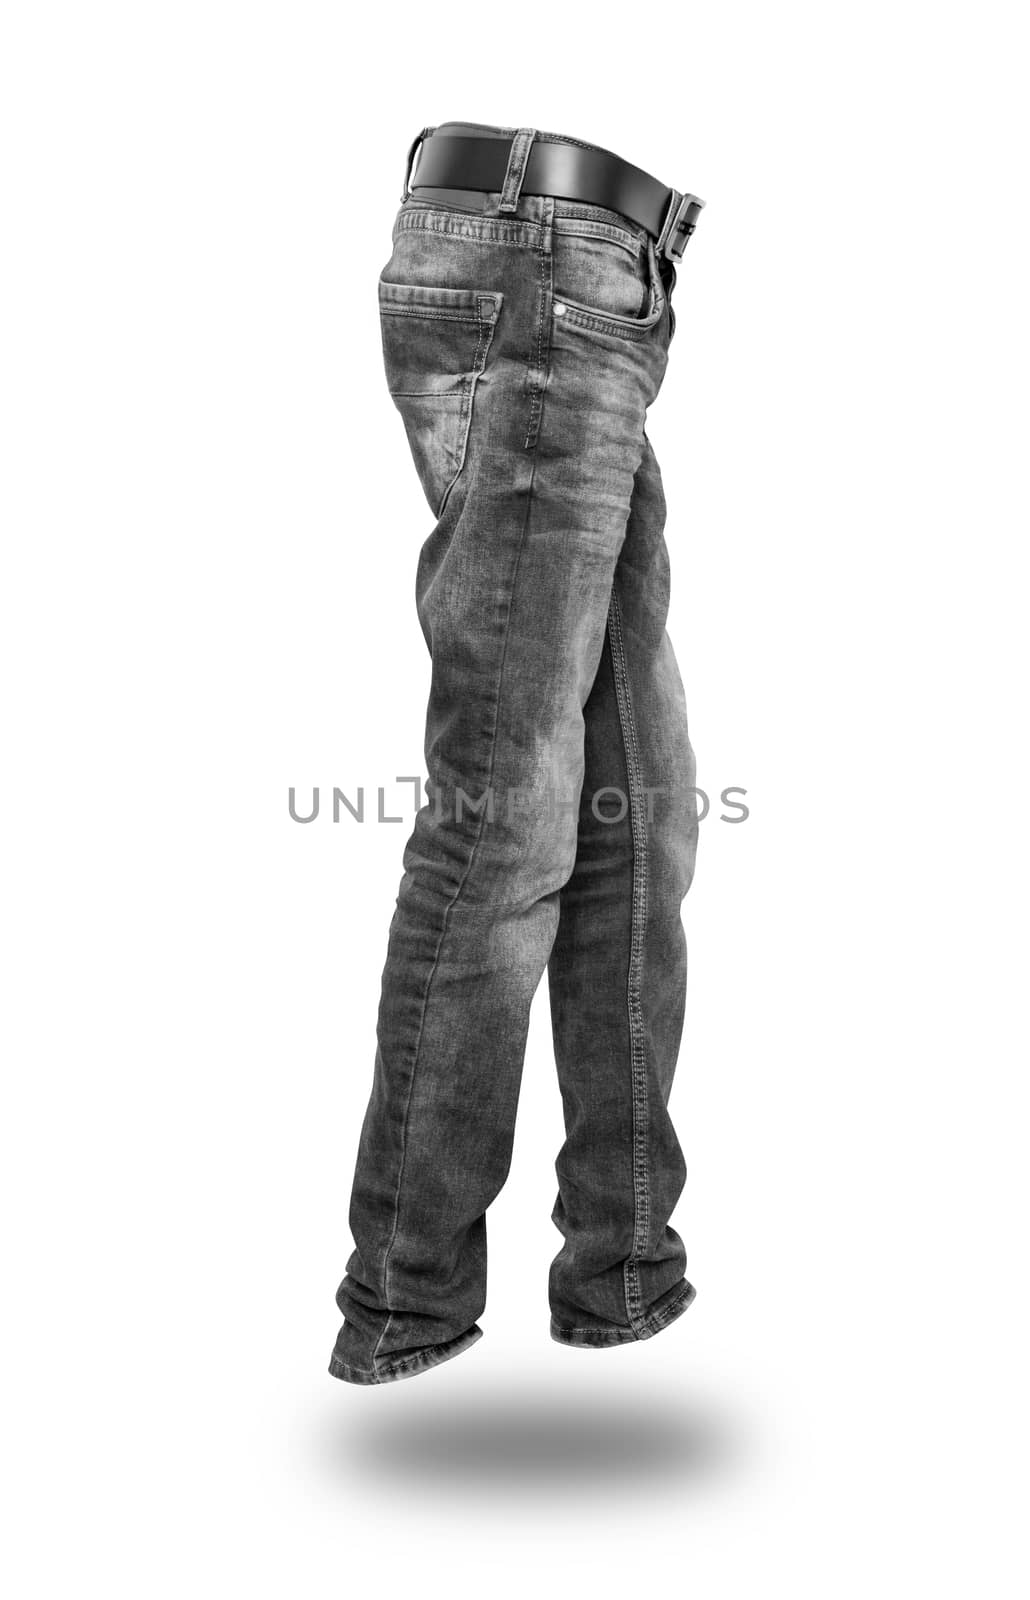 black jeans side view with belt, teenager. Isolated. With clipping path